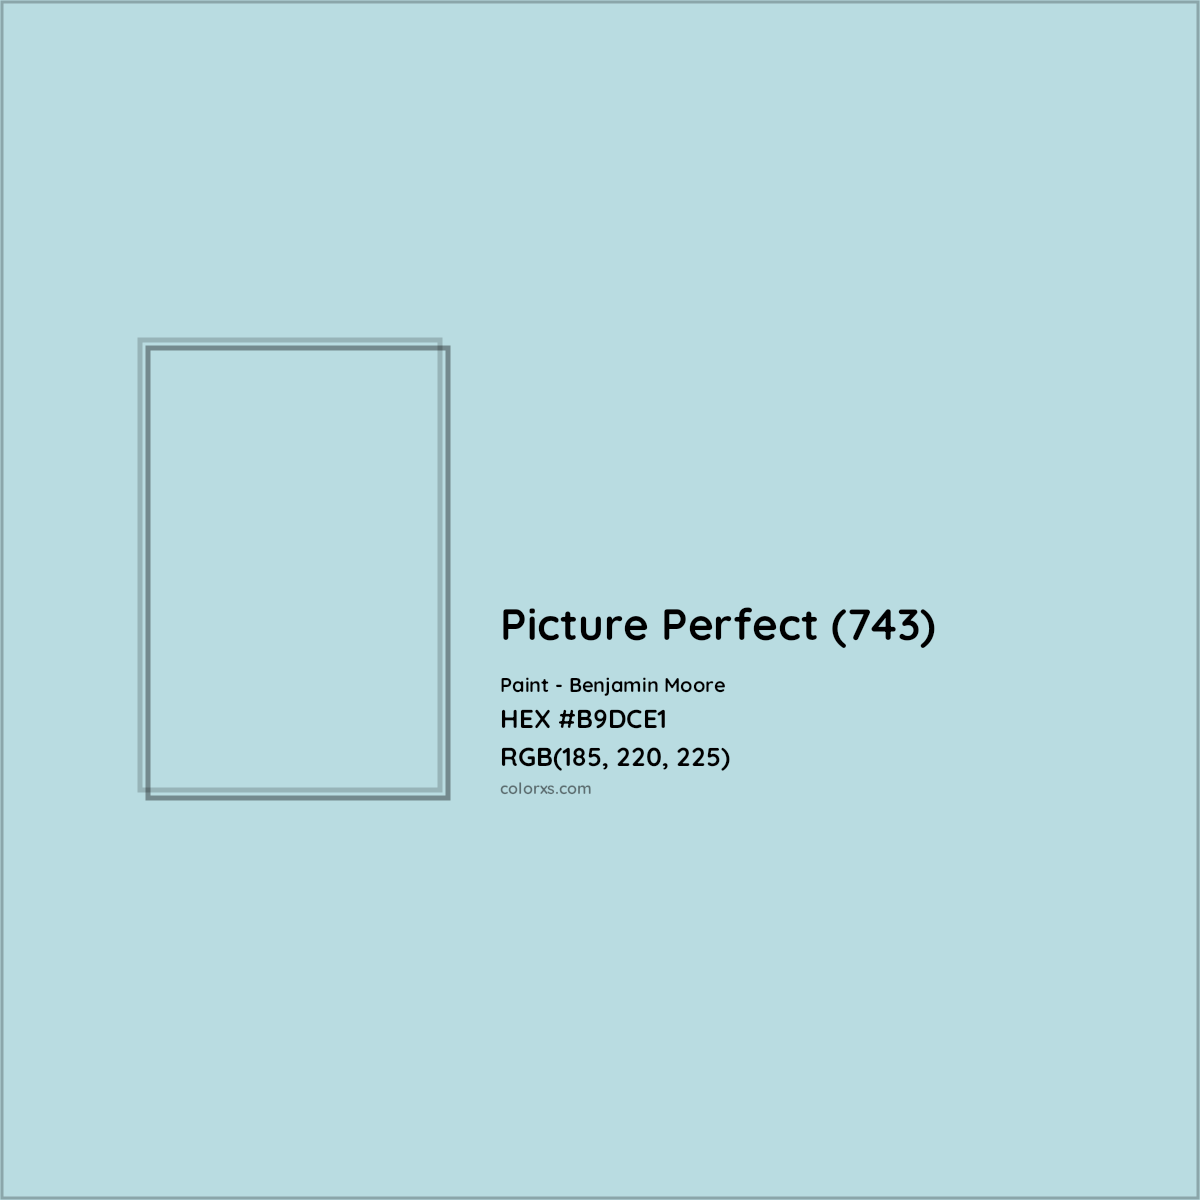 HEX #B9DCE1 Picture Perfect (743) Paint Benjamin Moore - Color Code